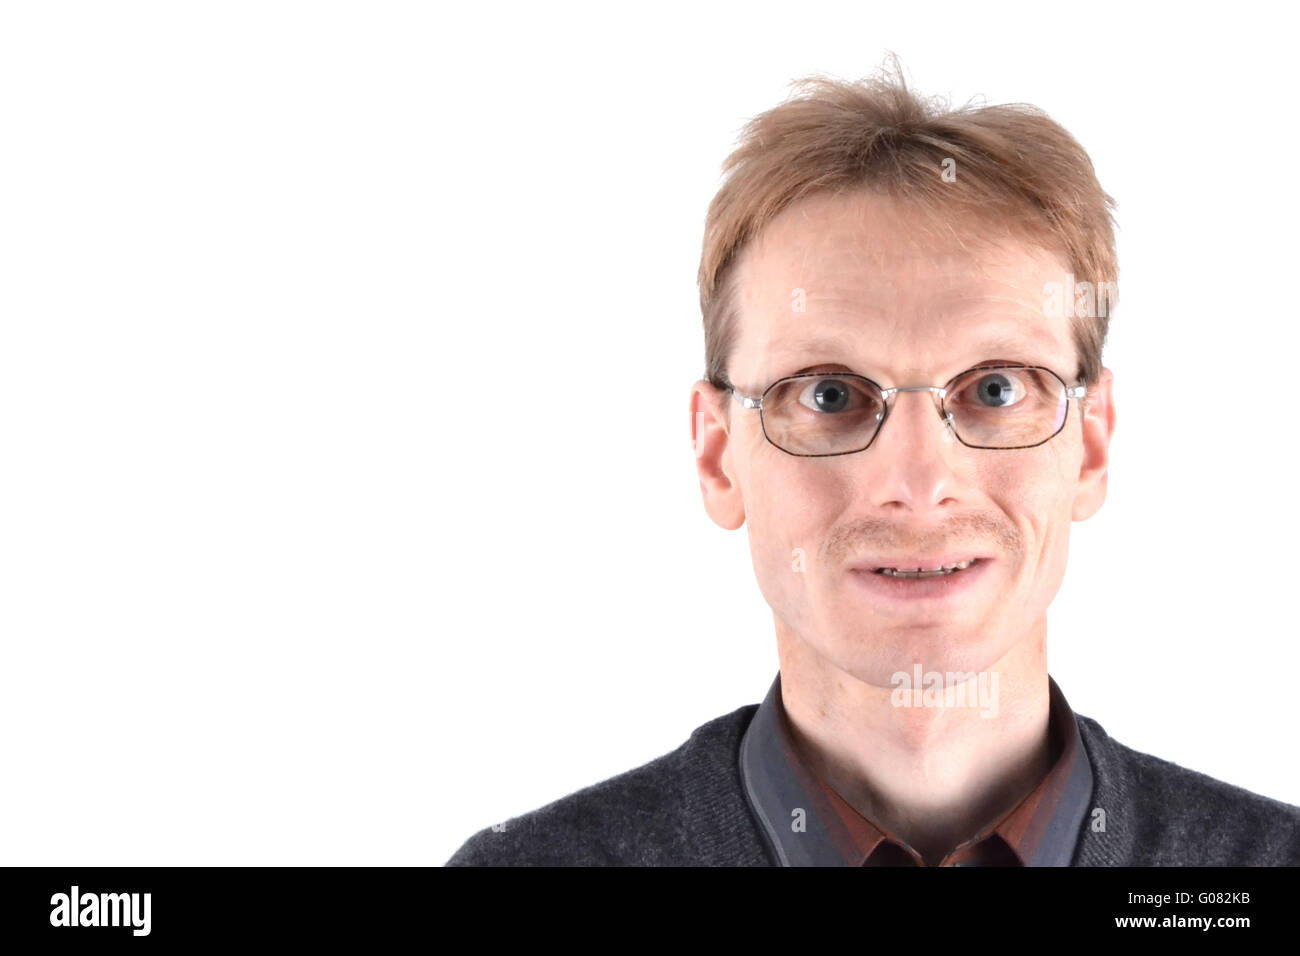 Blond man with glasses Stock Photo